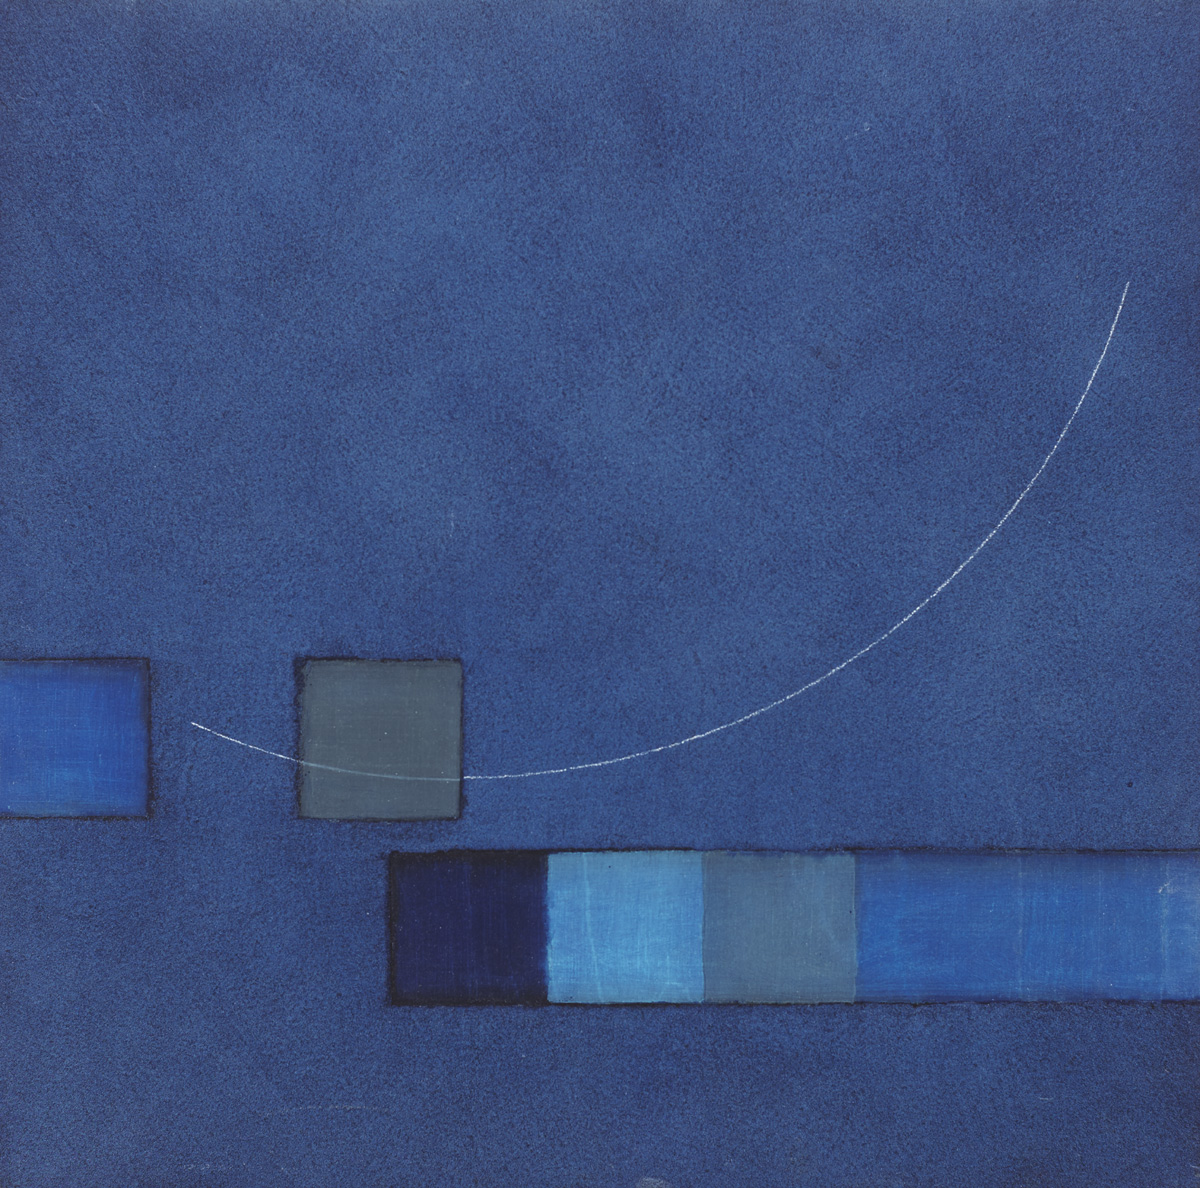 BLUE WOODNOTE 4M, 2004 by Felim Egan sold for 1,500 at Whyte's Auctions